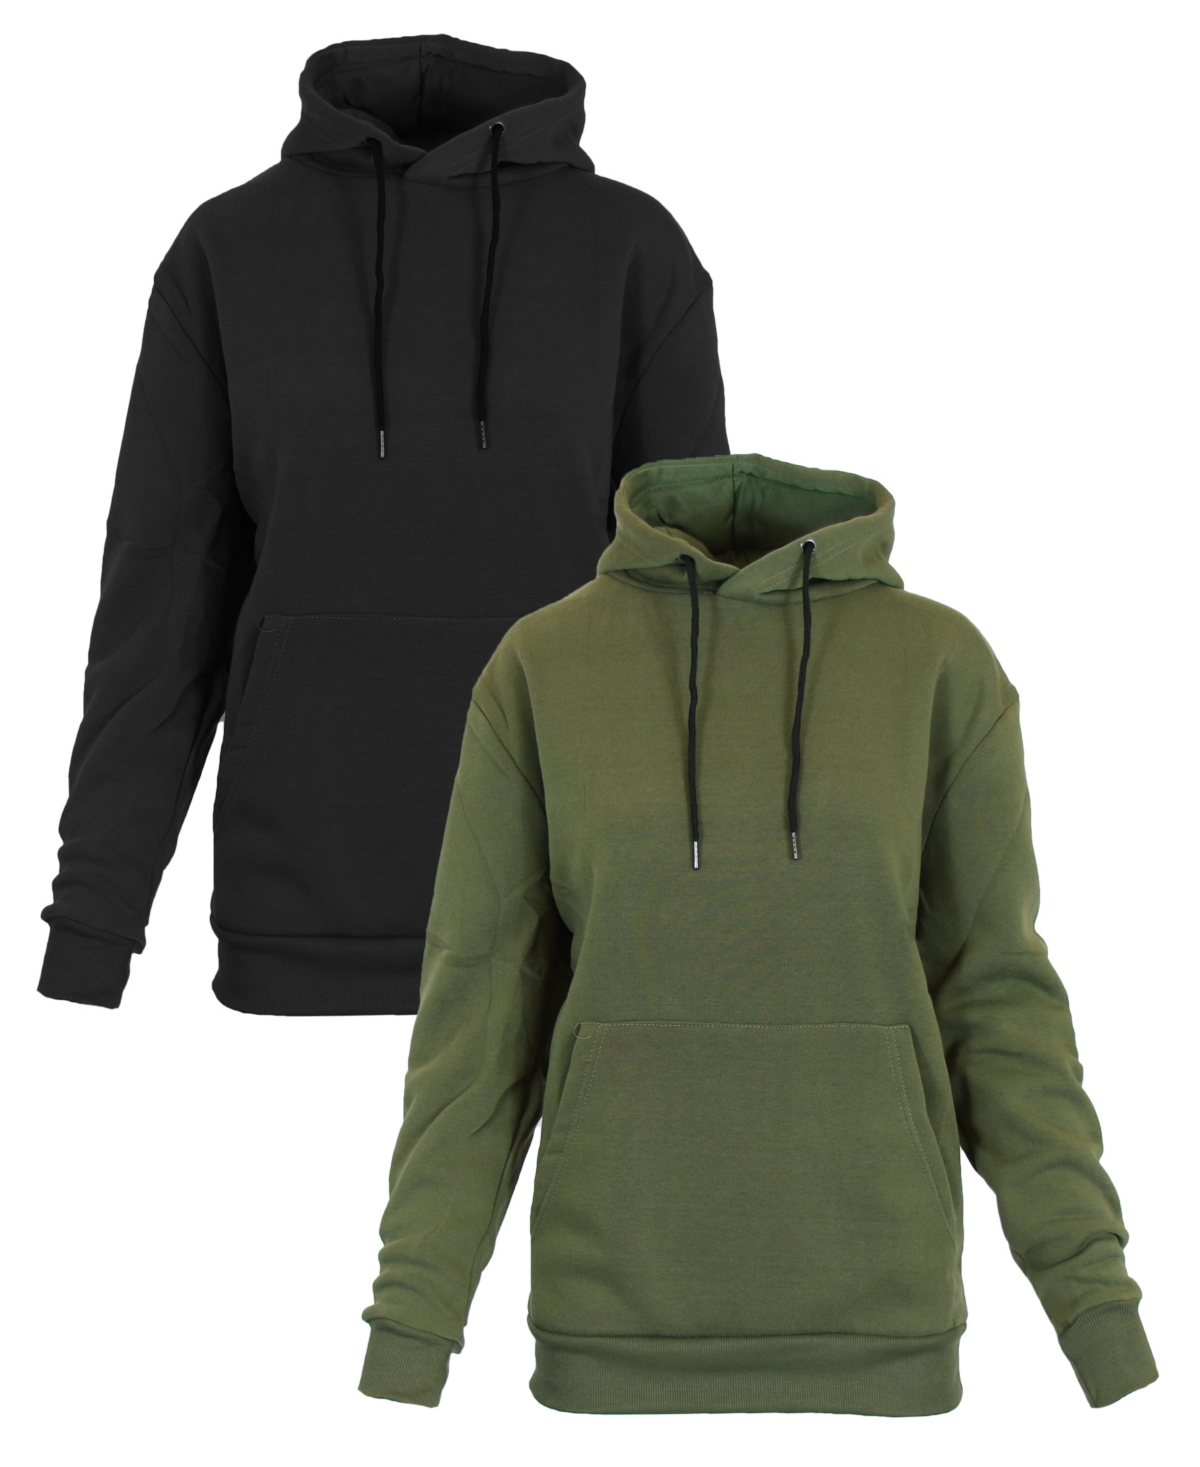 Women's Heavyweight Loose Fit Fleece Lined Pullover Hoodie Set, 2 Piece - Charcoal-Navy